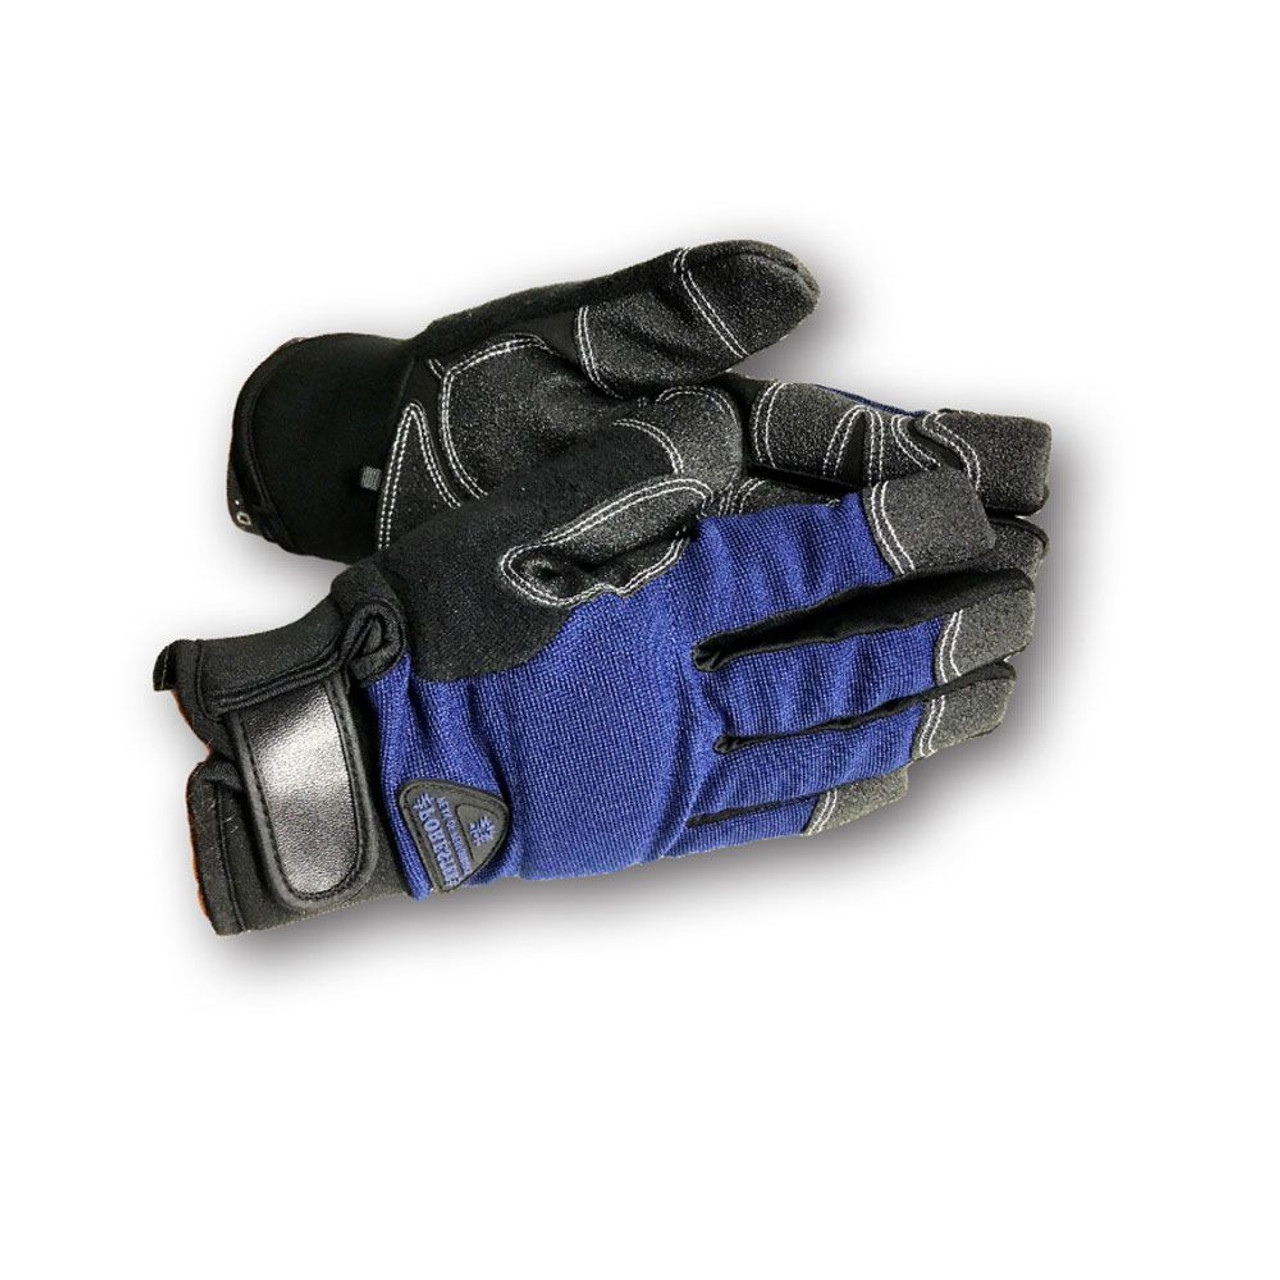 https://cdn11.bigcommerce.com/s-49j9i6u61/images/stencil/1280x1280/products/5135/5652/forester-winter-mechanic-style-work-glove-3m-thinsulate-fogl7122-10__11821.1635899188.jpg?c=1